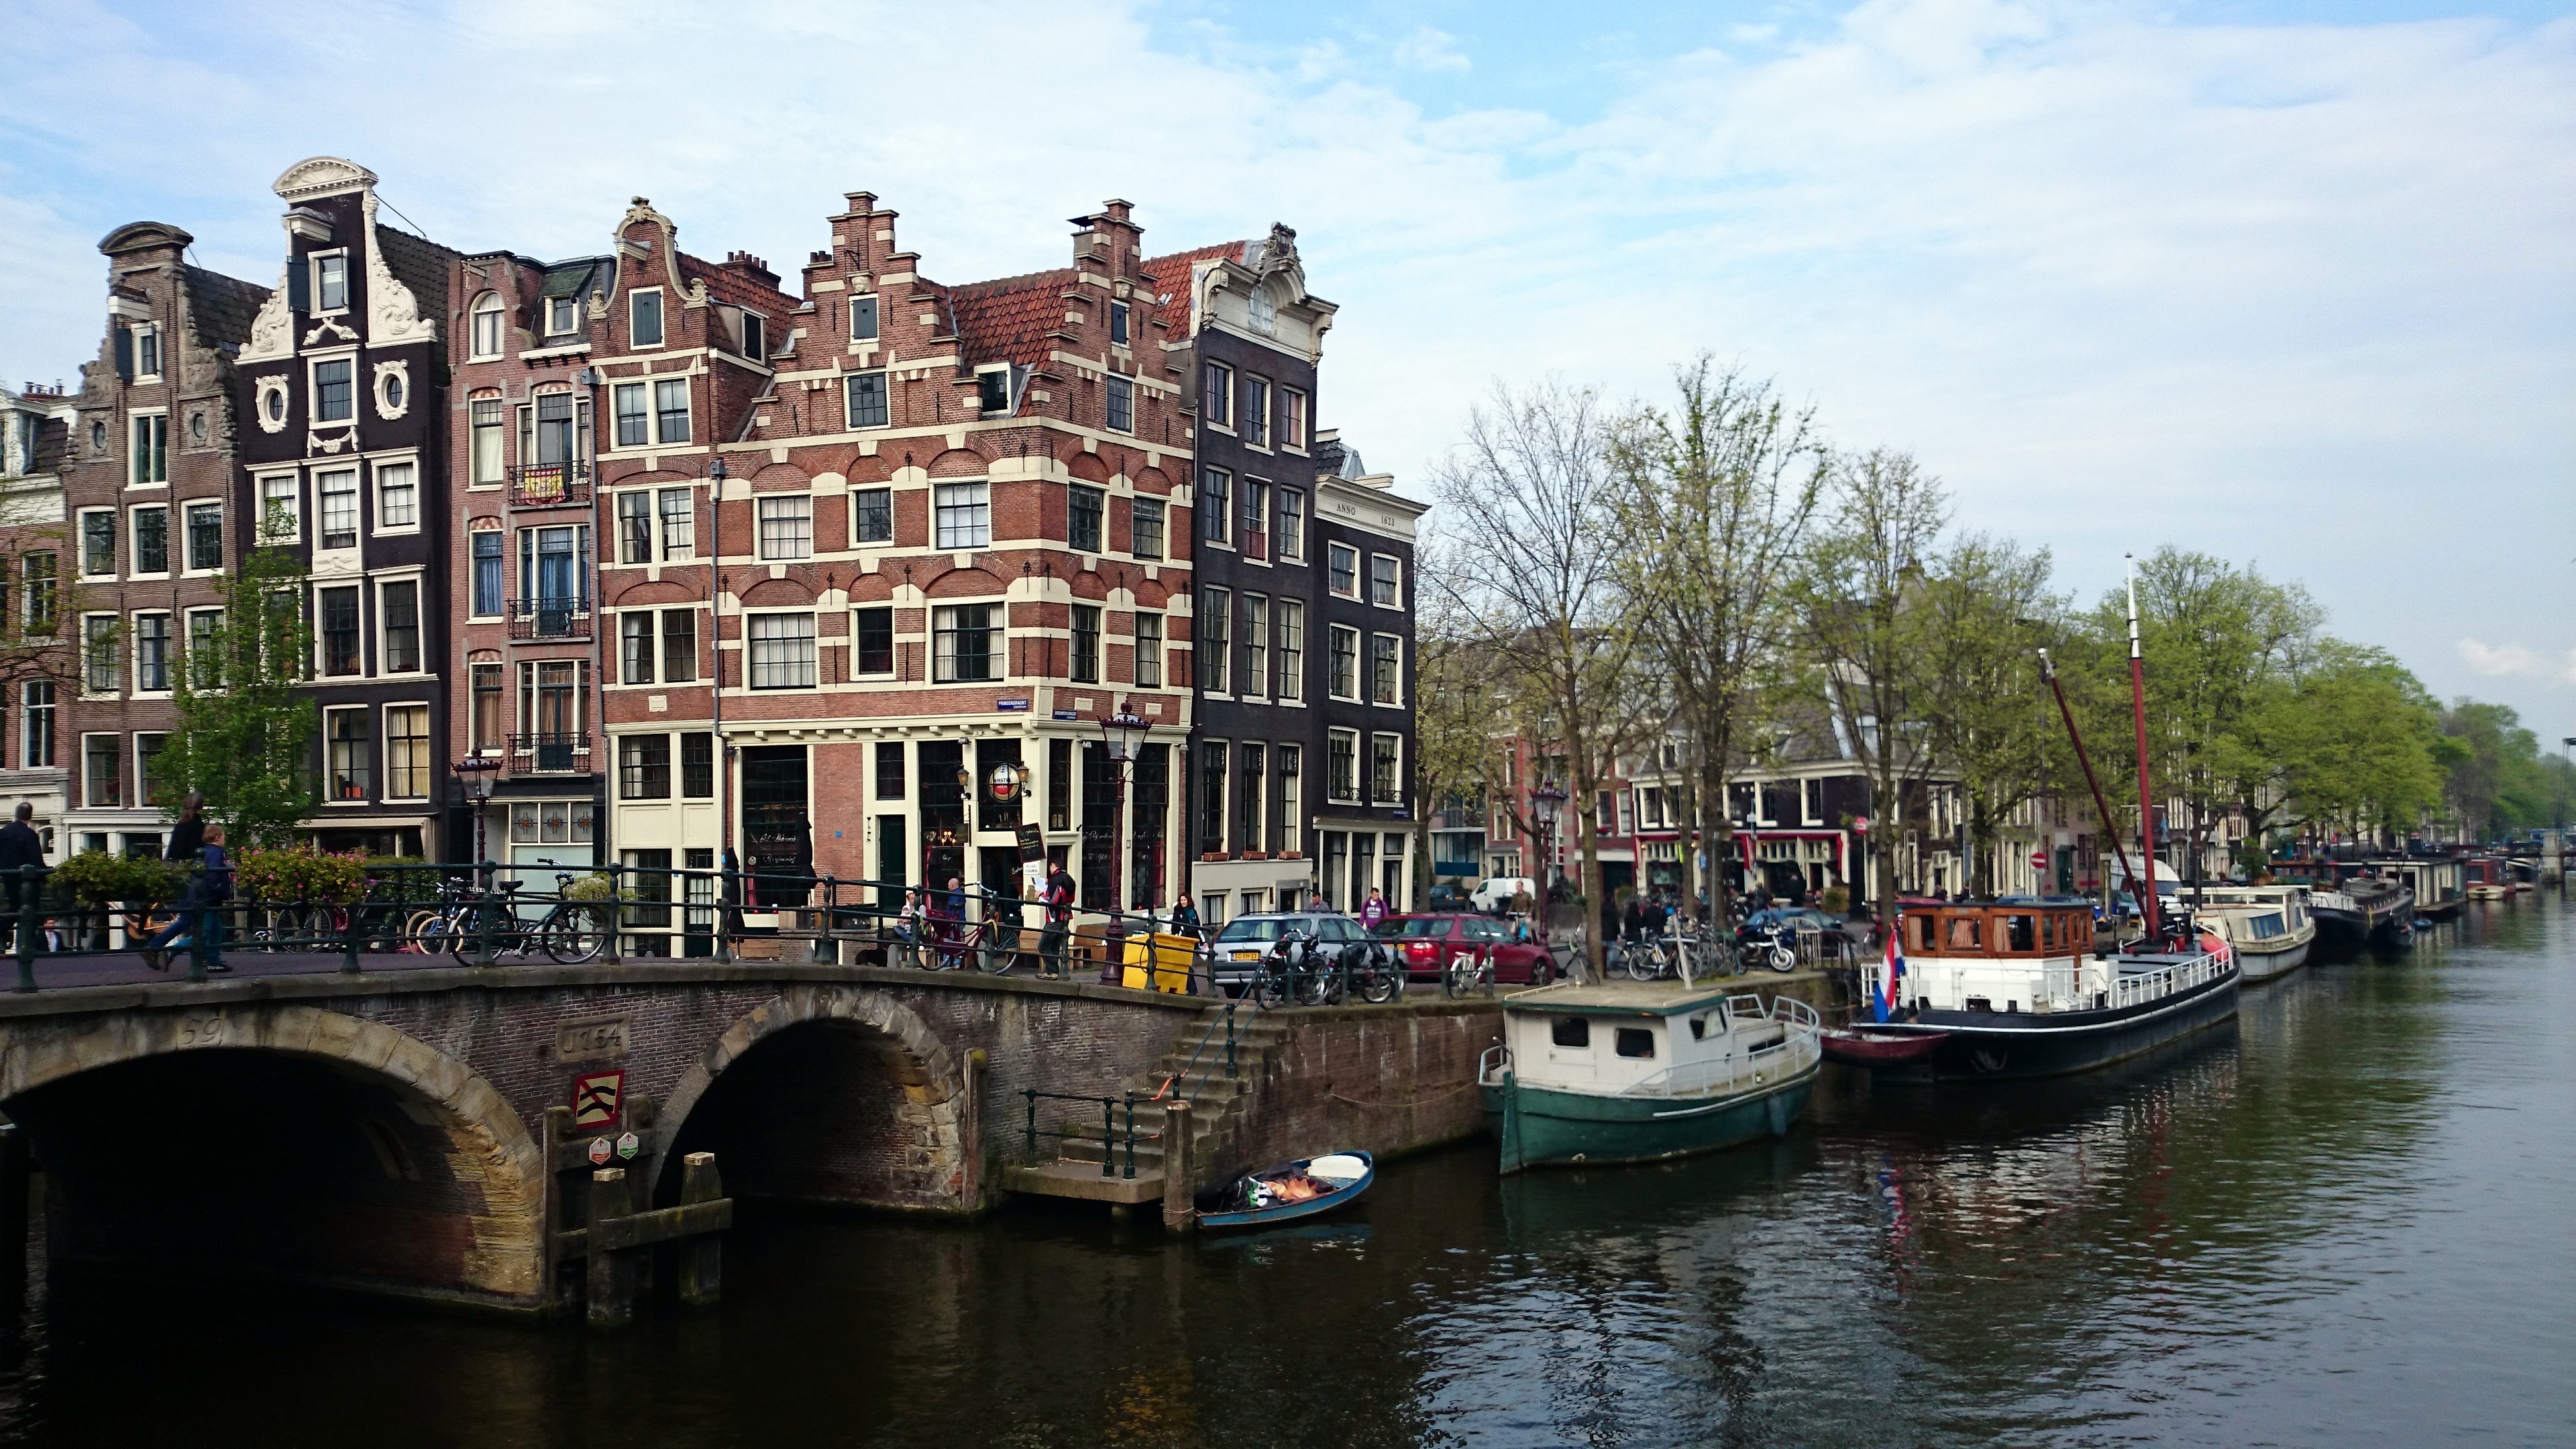 The charming canals of beautiful Amsterdam : Netherlands | Visions of